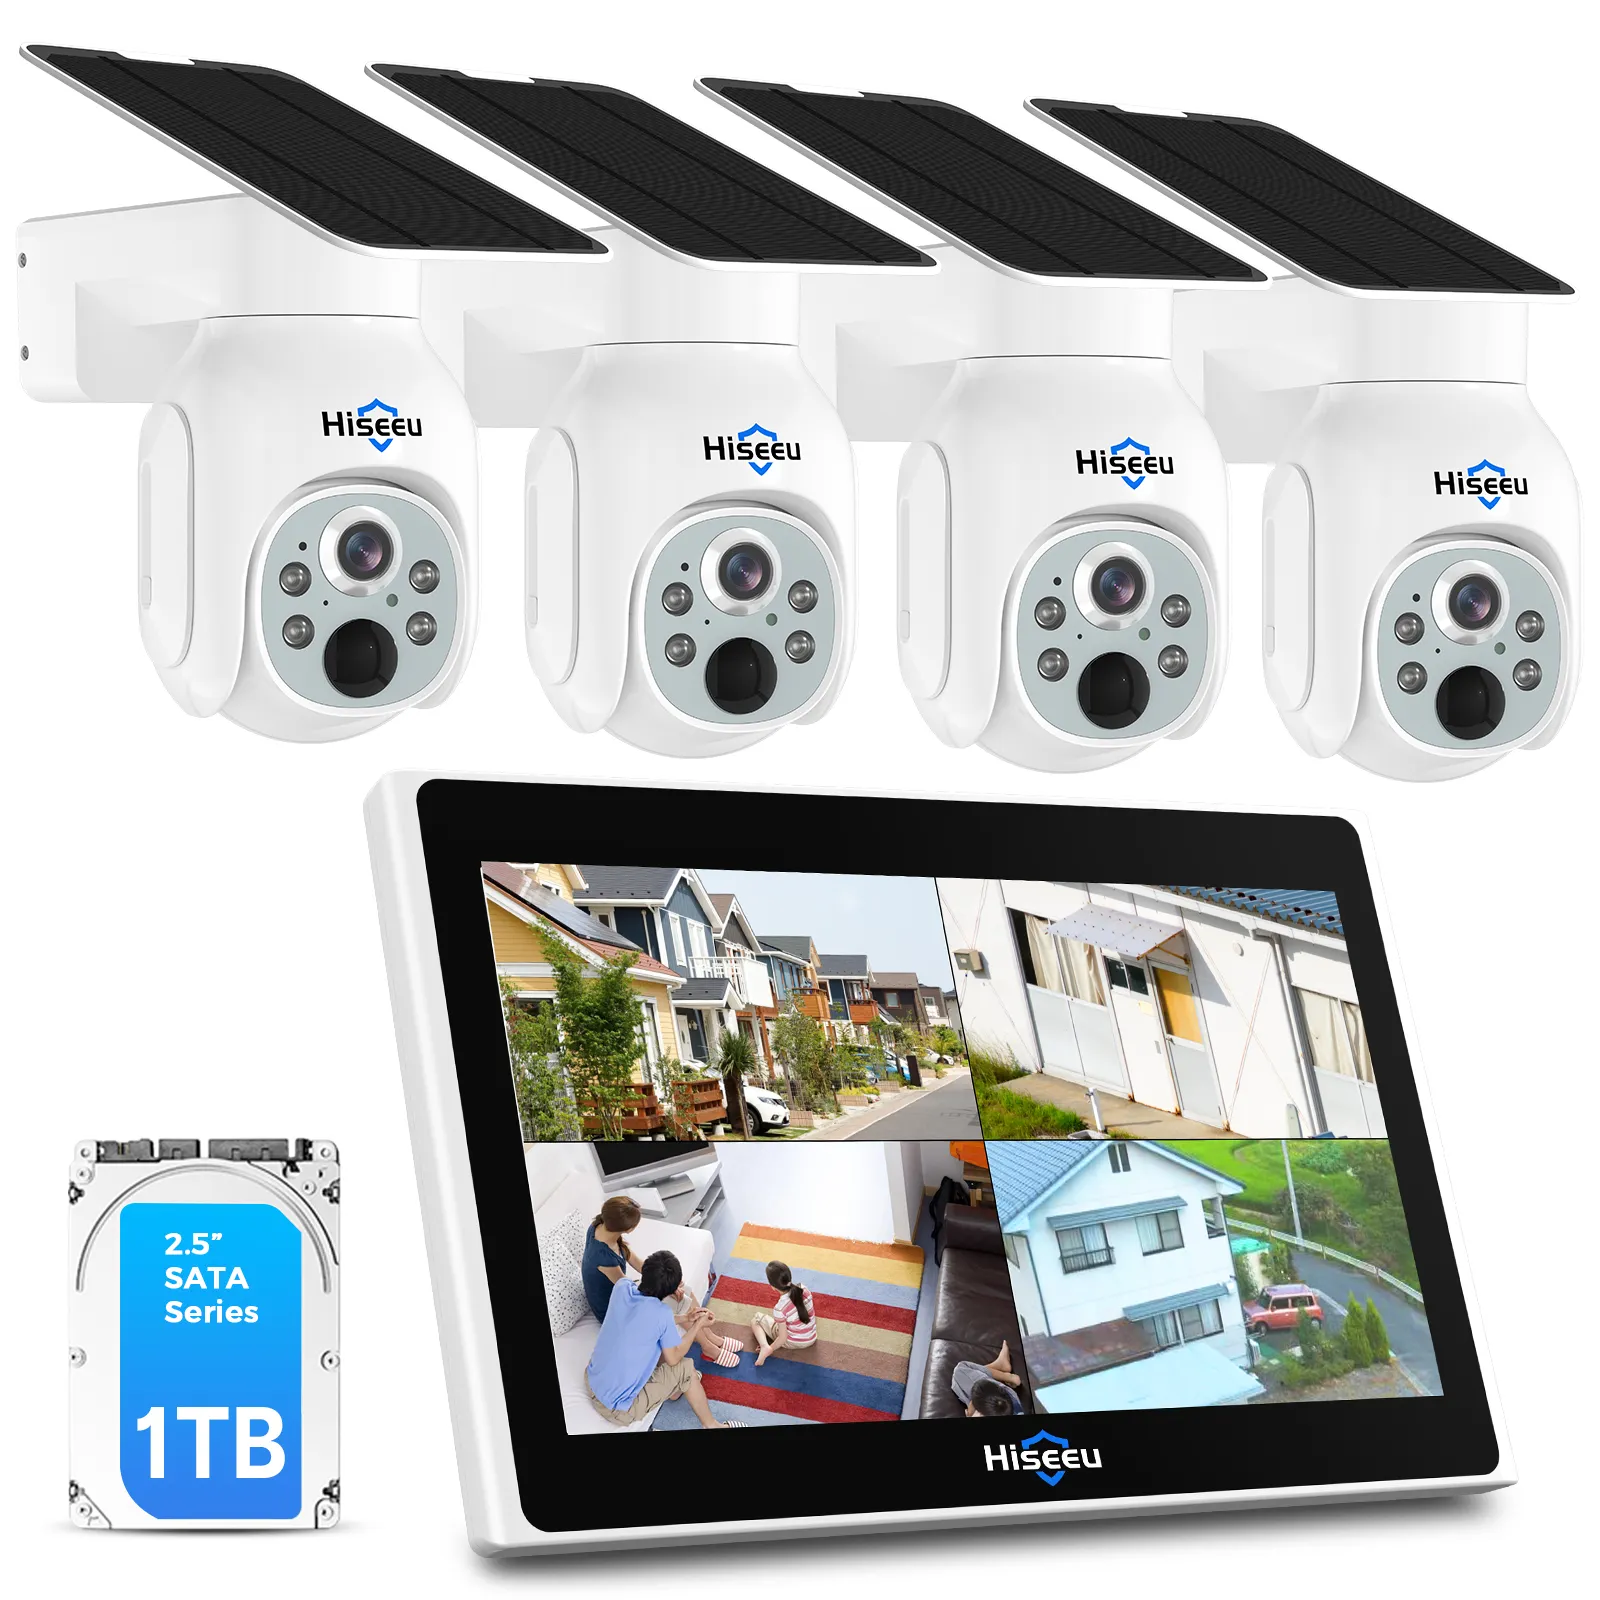 10 Inch LCD 4MP outdoors WIFI full color night vision NVR Kit Security Surveillance Solar Ptz Wireless Cctv Camera System